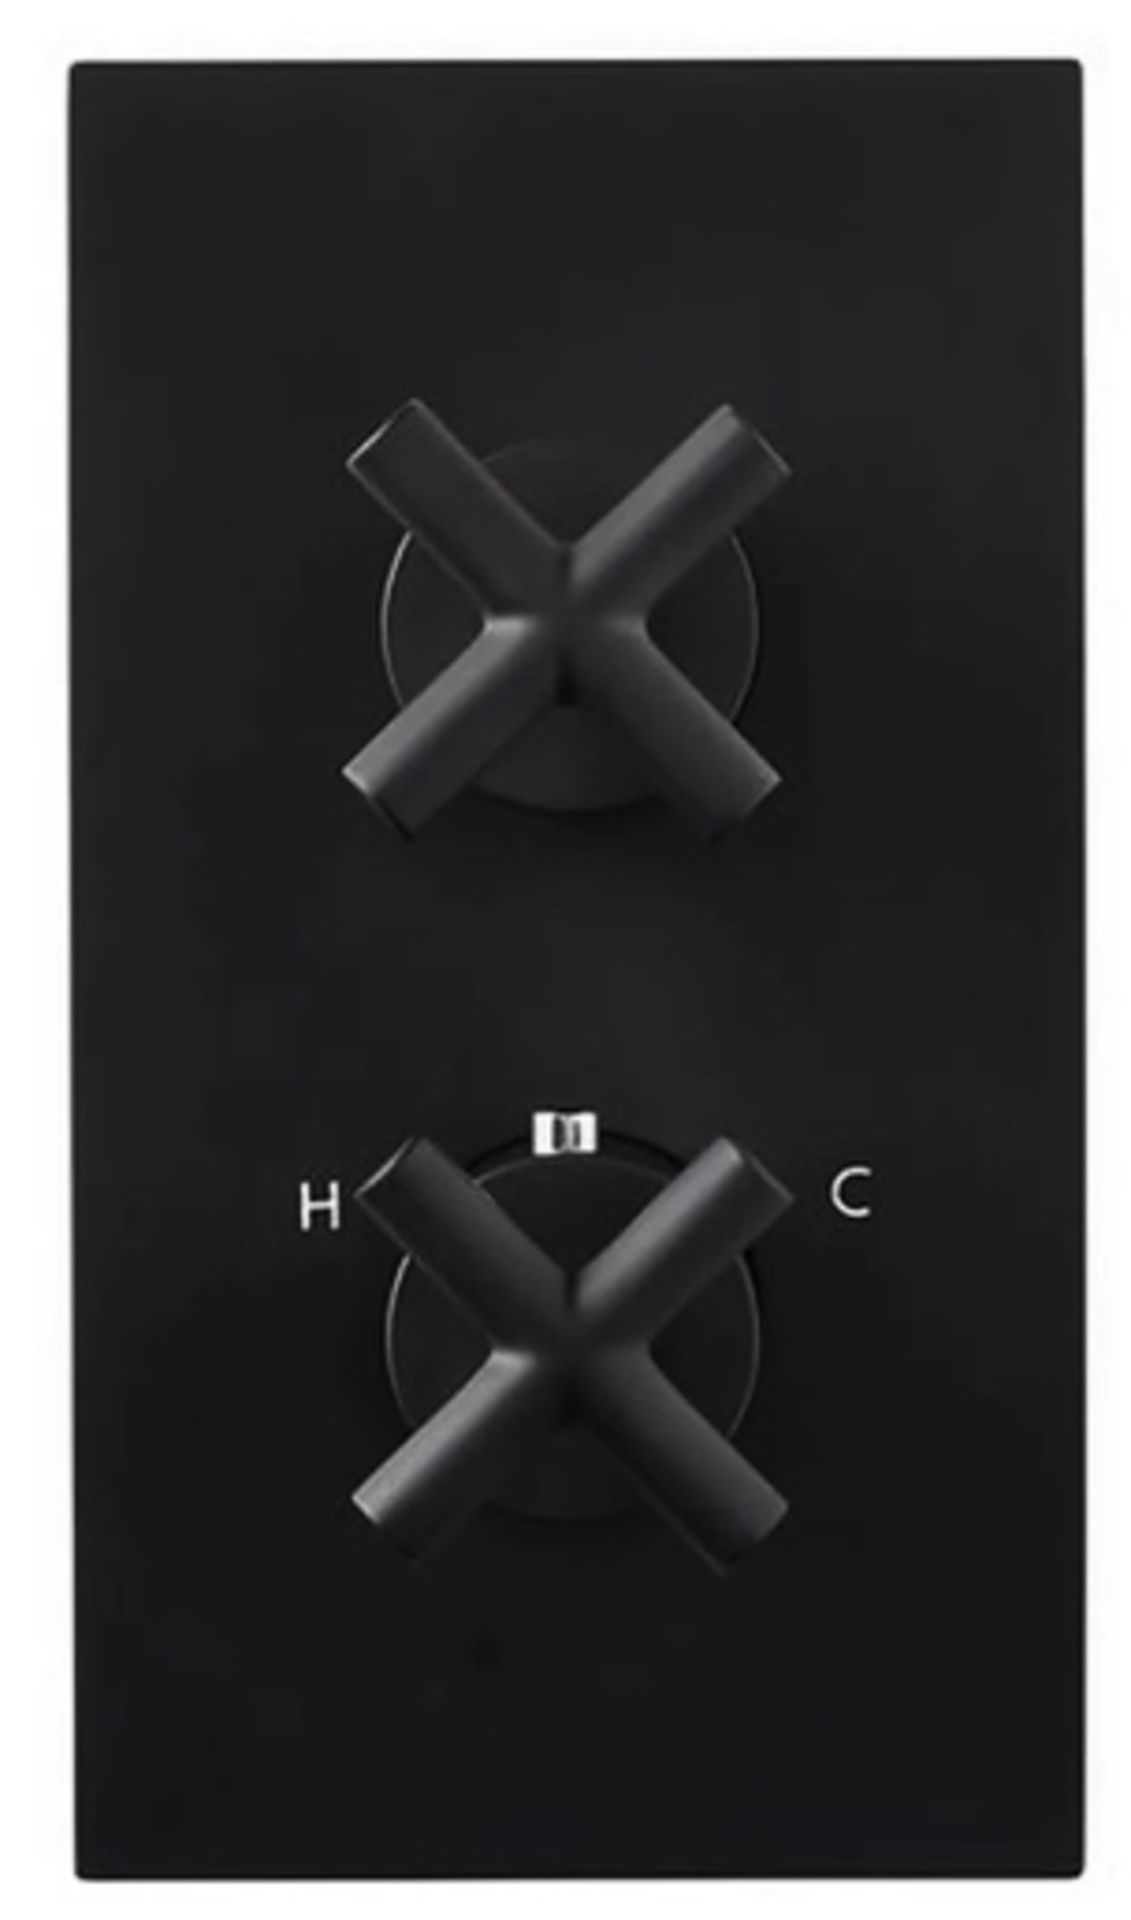 New in Box Noir Concealed Shower Valve Dual Thermostatic - Black RRP £232 **NO VAT**